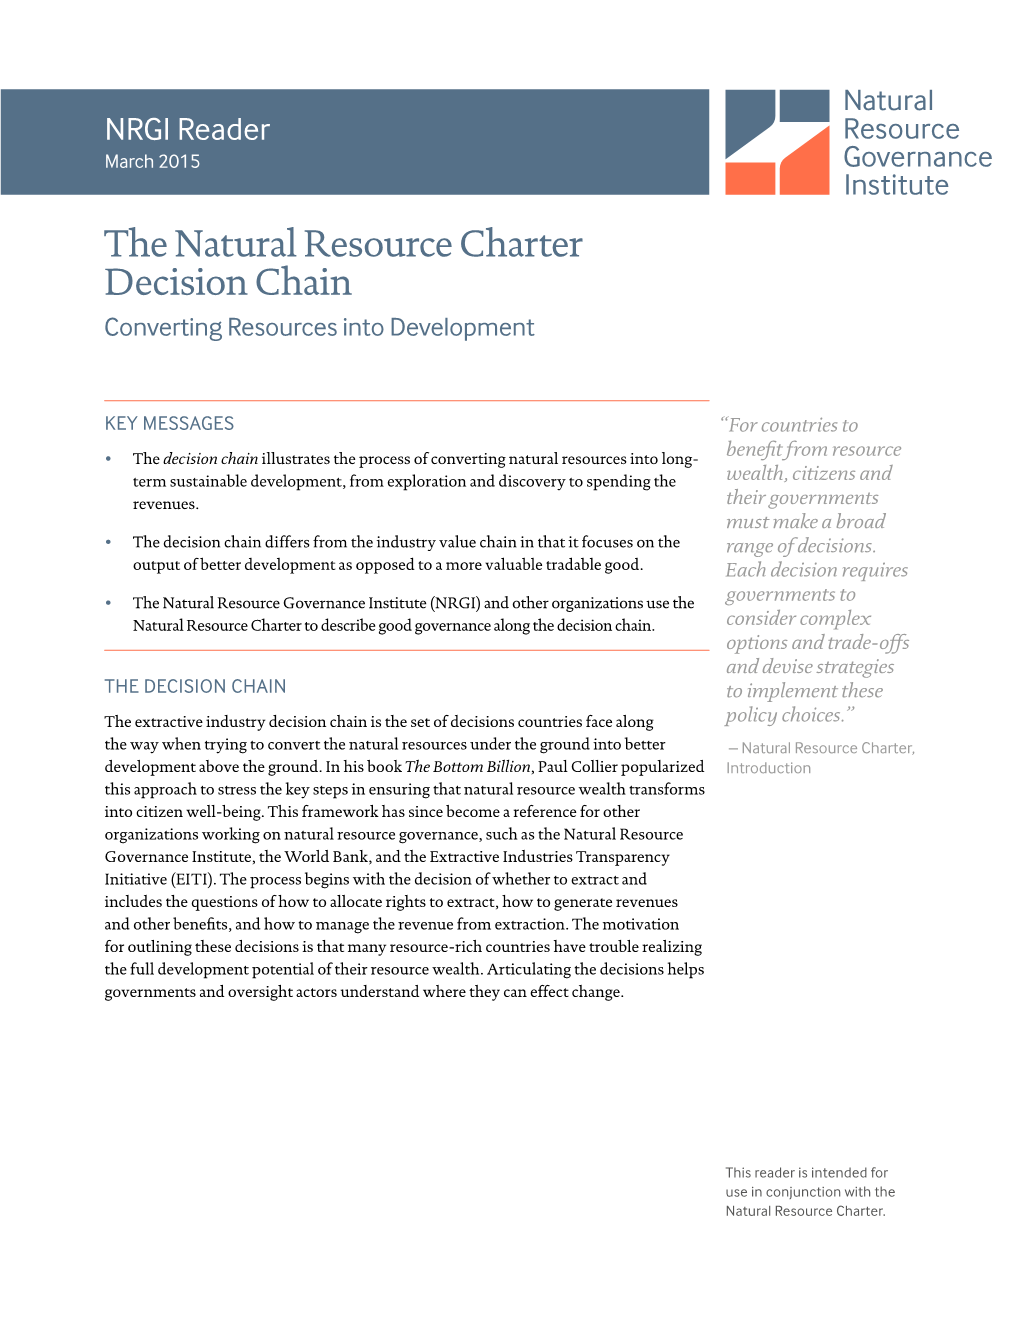 The Natural Resource Charter Decision Chain Converting Resources Into Development